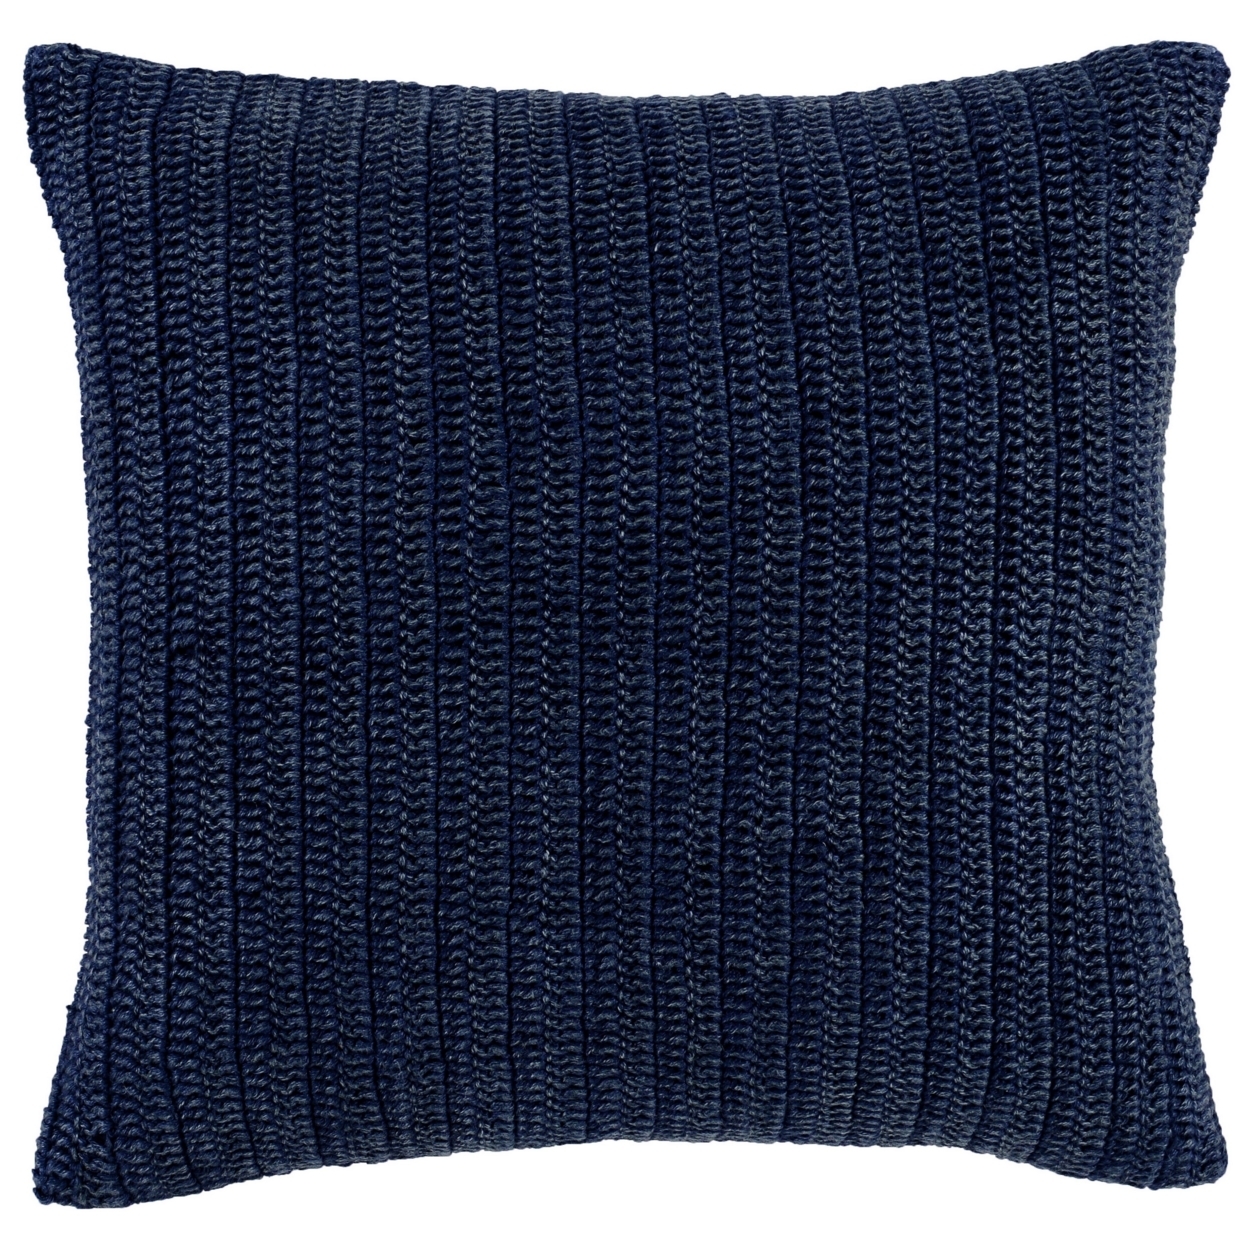 Square Fabric Throw Pillow With Hand Knit Details And Knife Edges, Blue- Saltoro Sherpi